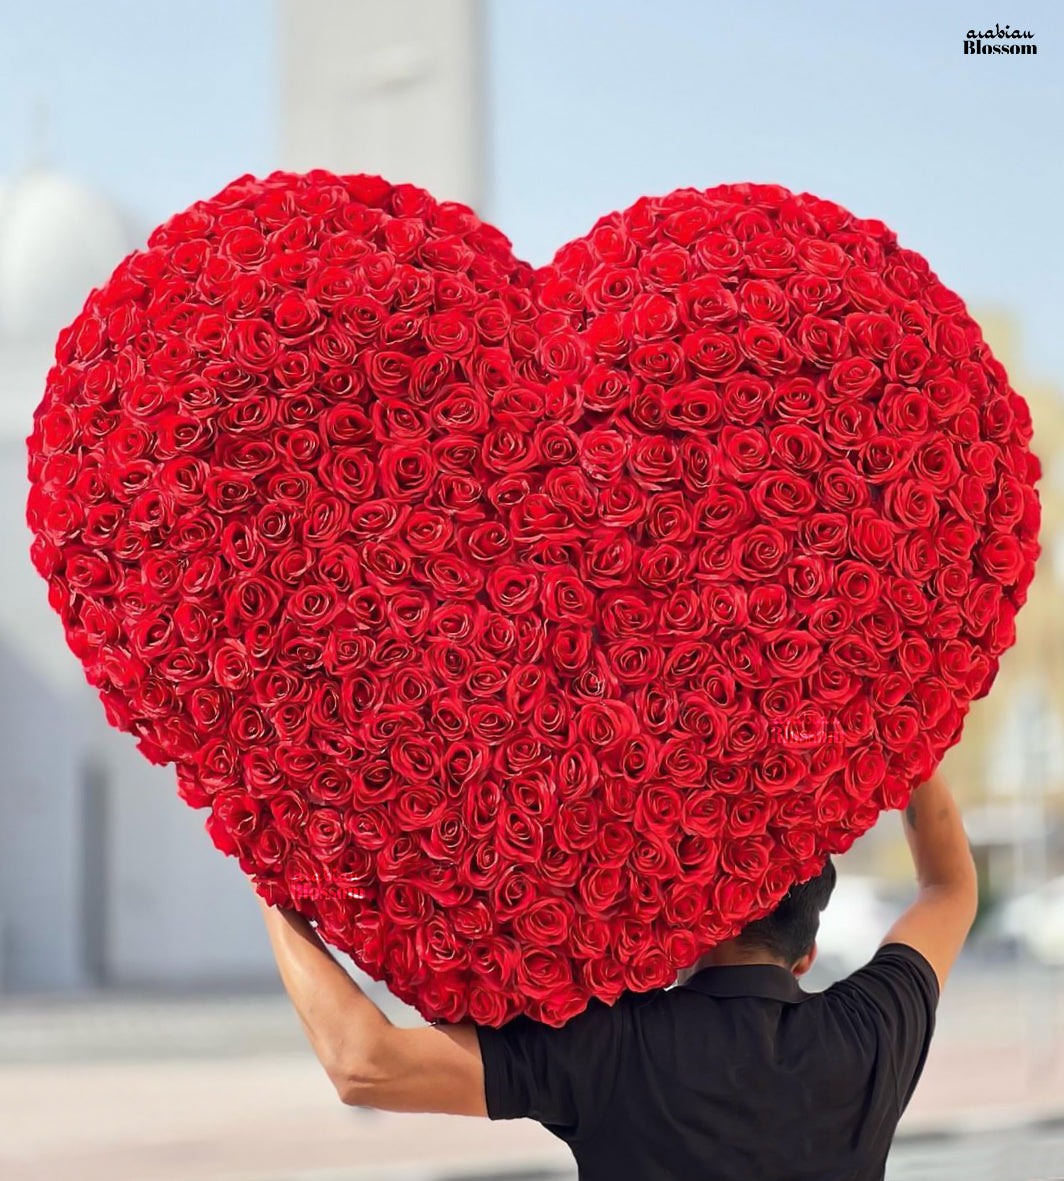 500 Red roses in a Heart